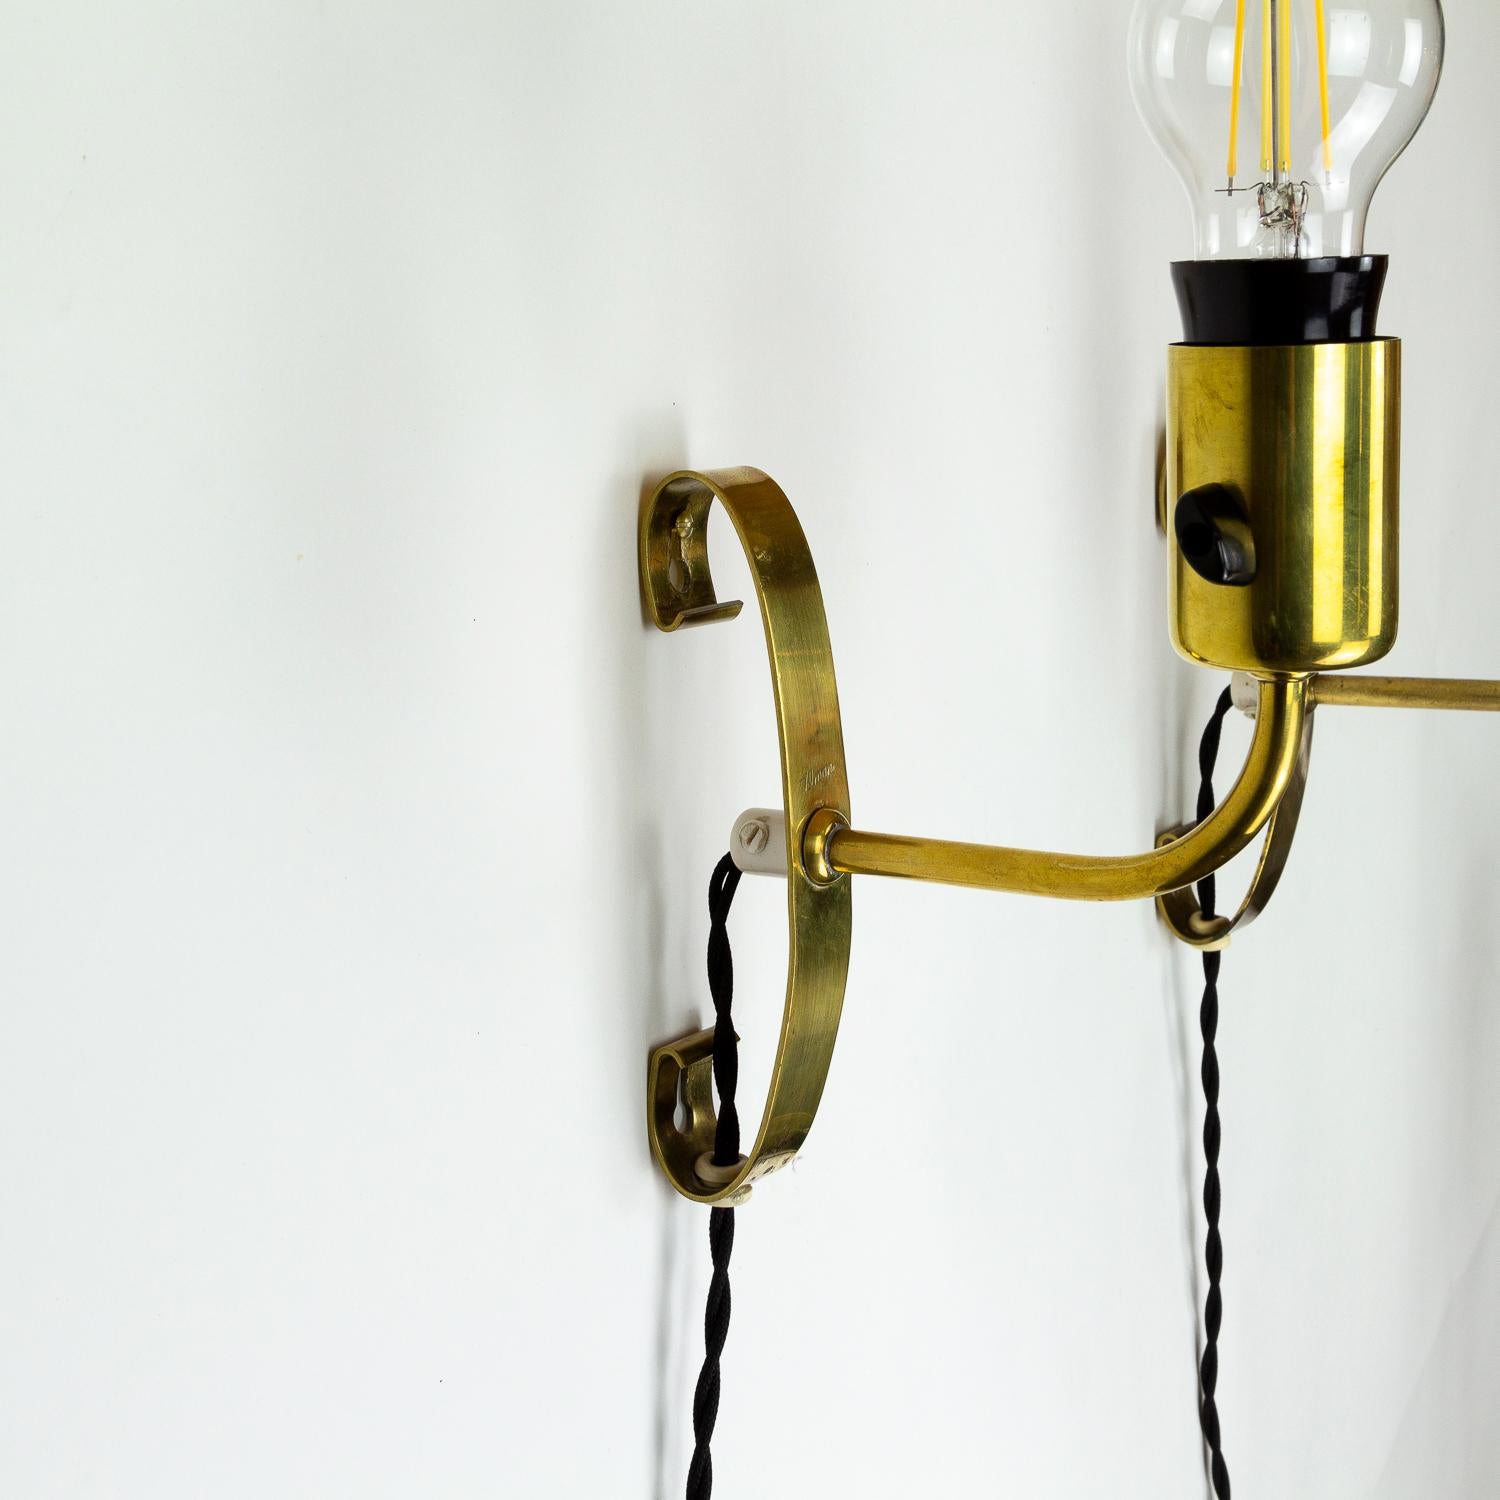 Pair of Midcentury Brass Wall Lights, Maria Lindemann, Idman Oy, Finland, 1950s For Sale 2